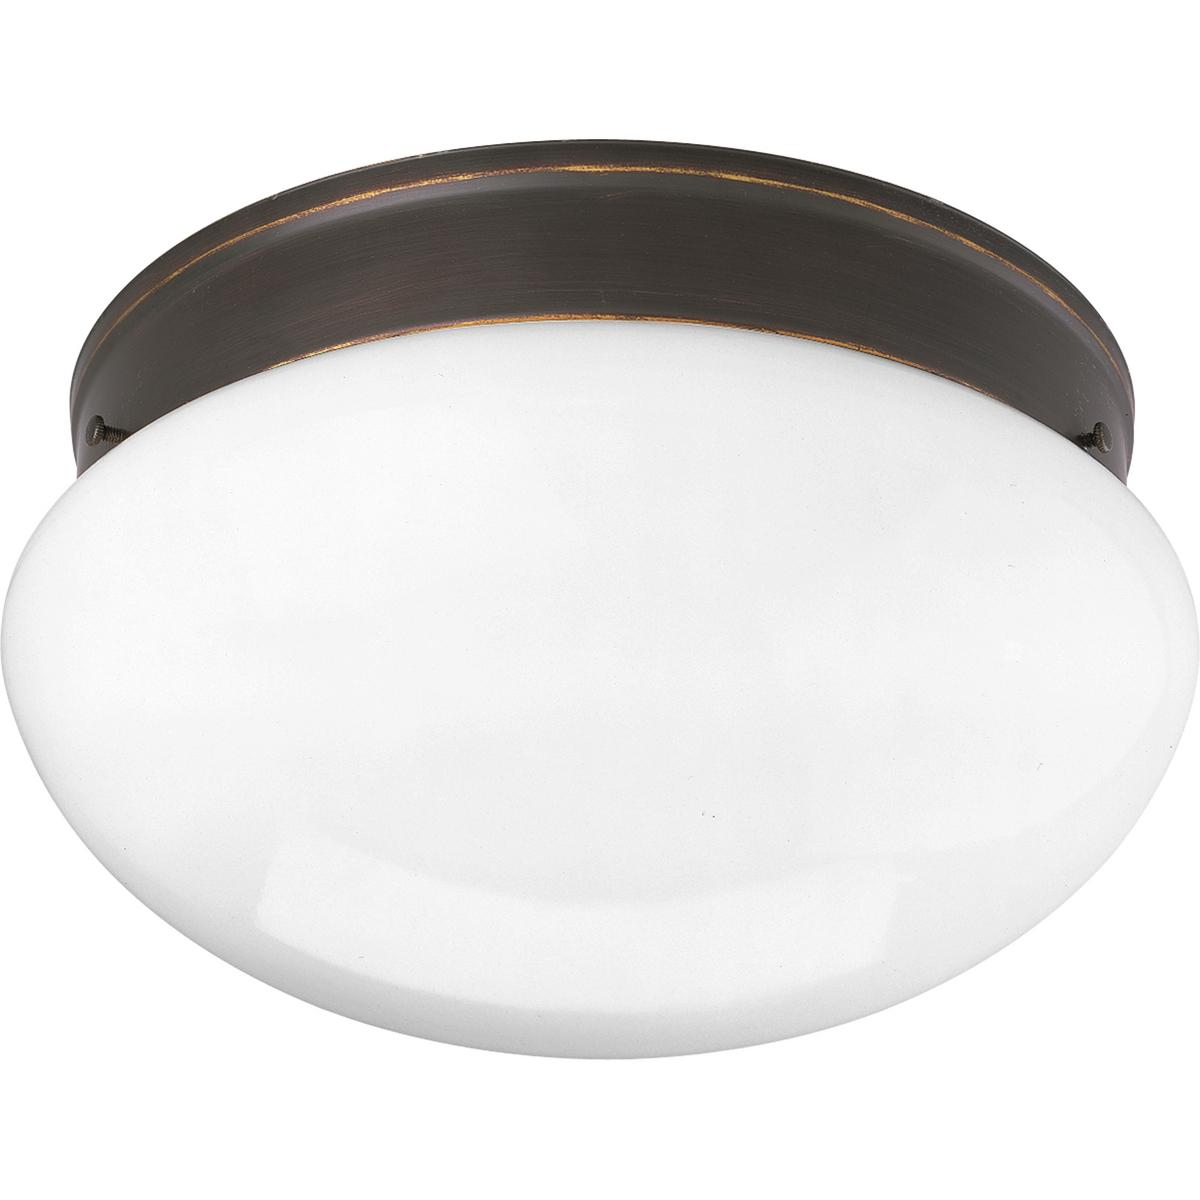 Hubbell P3412-20 With a monochrome construction perfect for a contemporary home, this two-light fixture charms with its mushroom-shaped white glass shade. The look is clean and unobtrusive, playing on the freshness of crisp white. A traditional two-light close to ceiling 